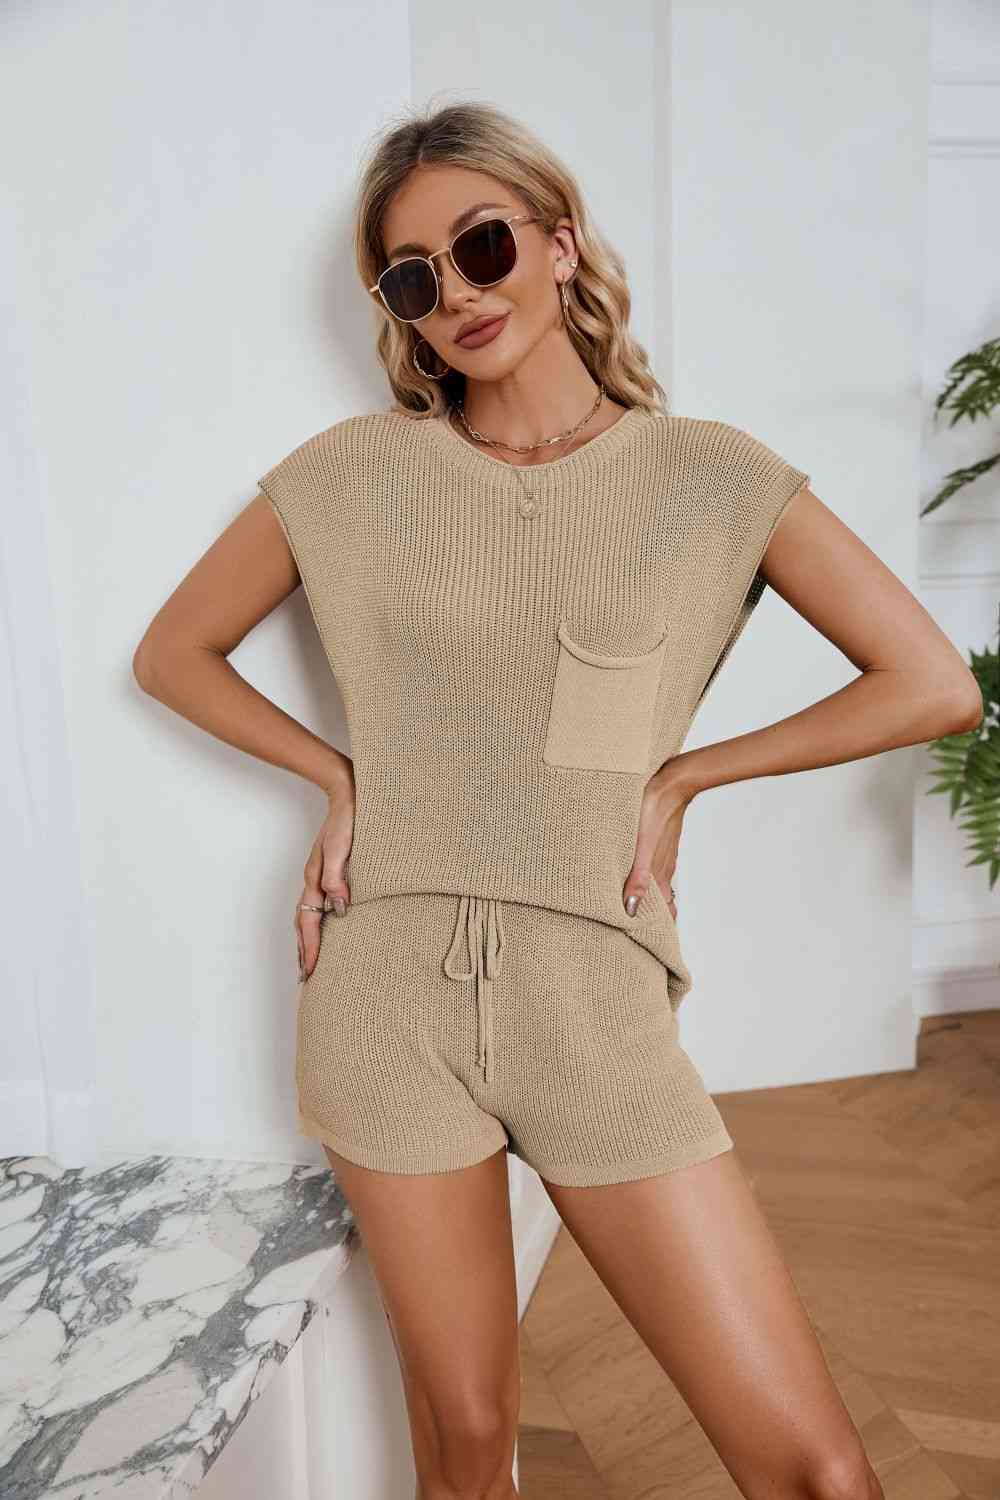 Women's Ribbed Round Neck Pocket Knit Top and Shorts Set